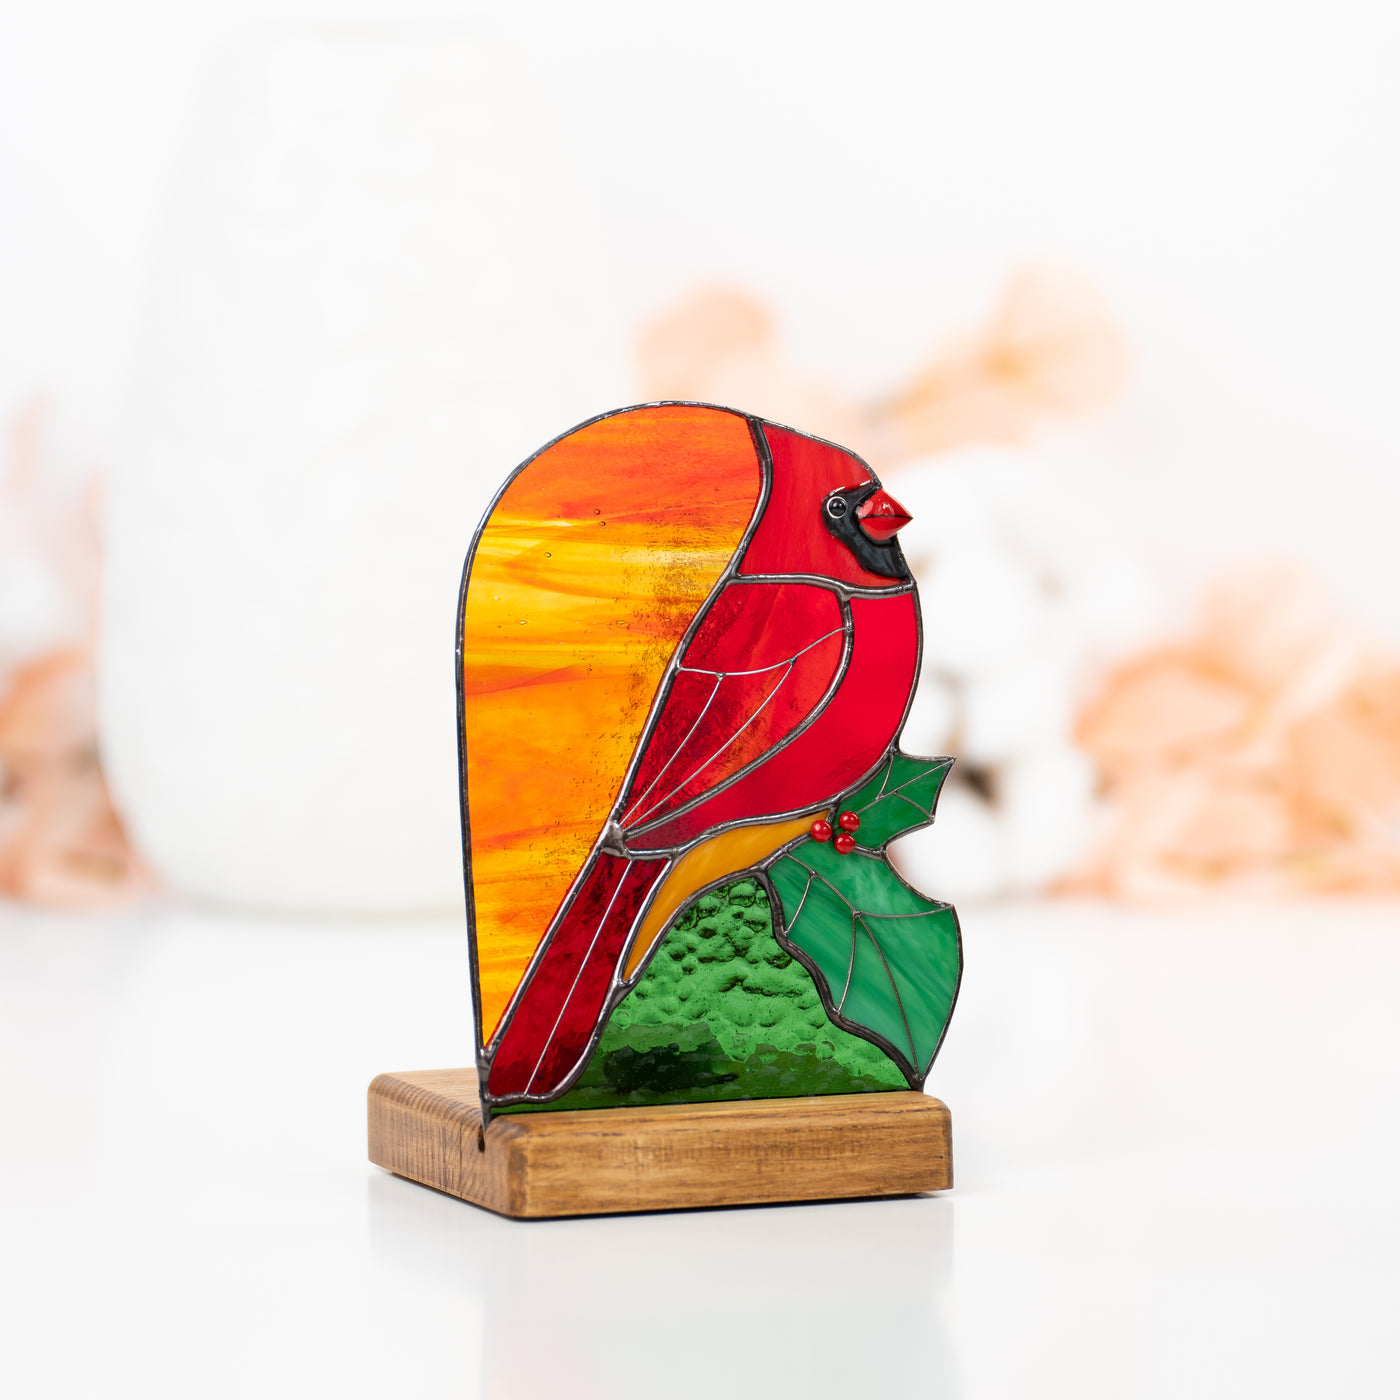 Candle-lit red cardinal with the leaf panel of stained glass